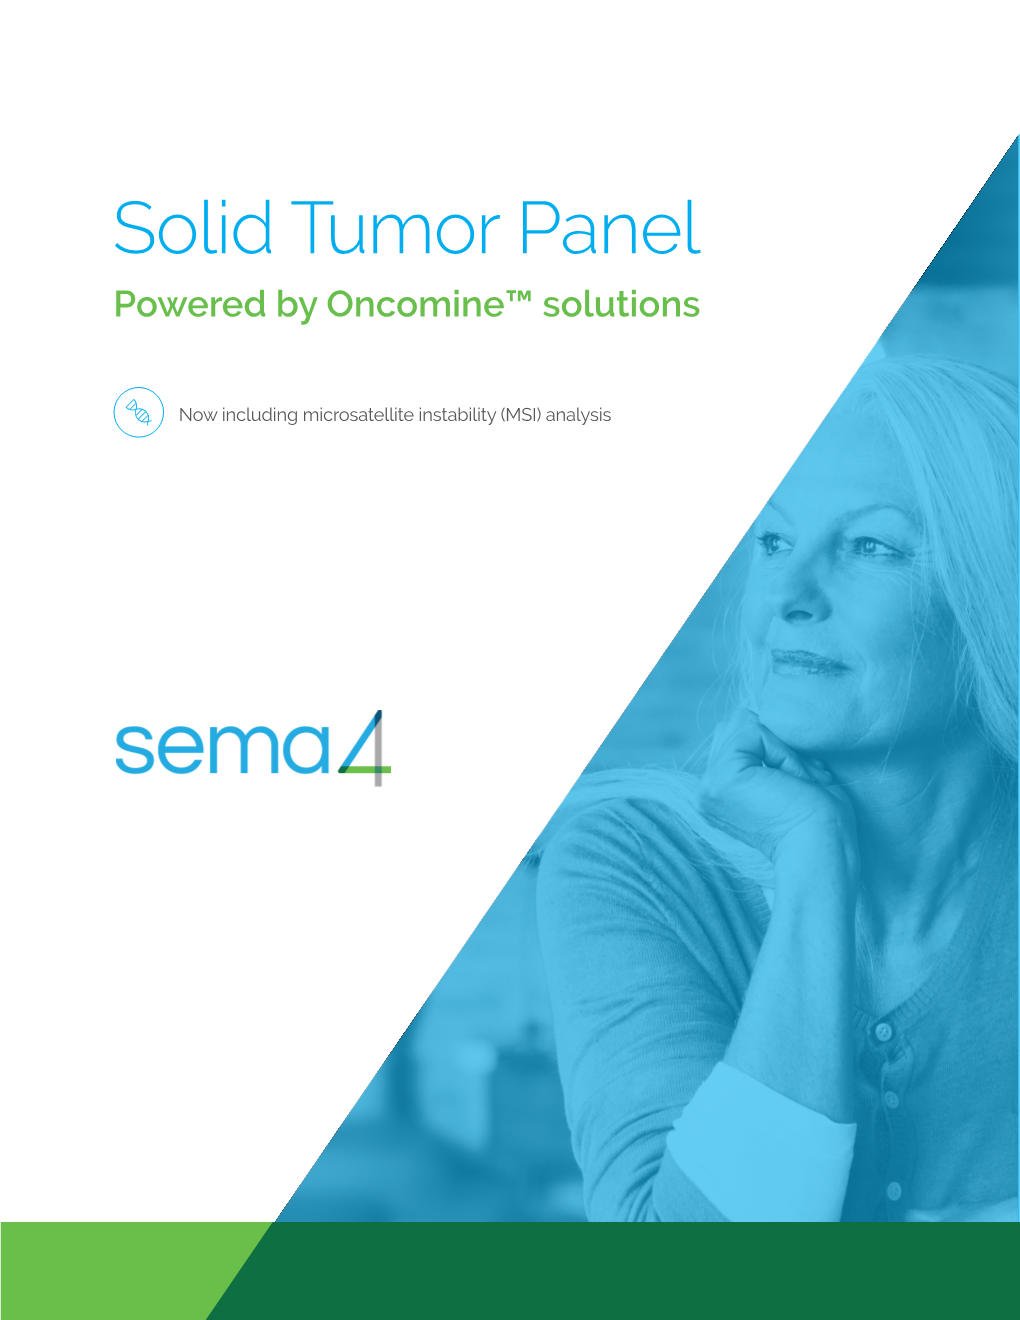 Solid Tumor Panel Powered by Oncomine™ Solutions